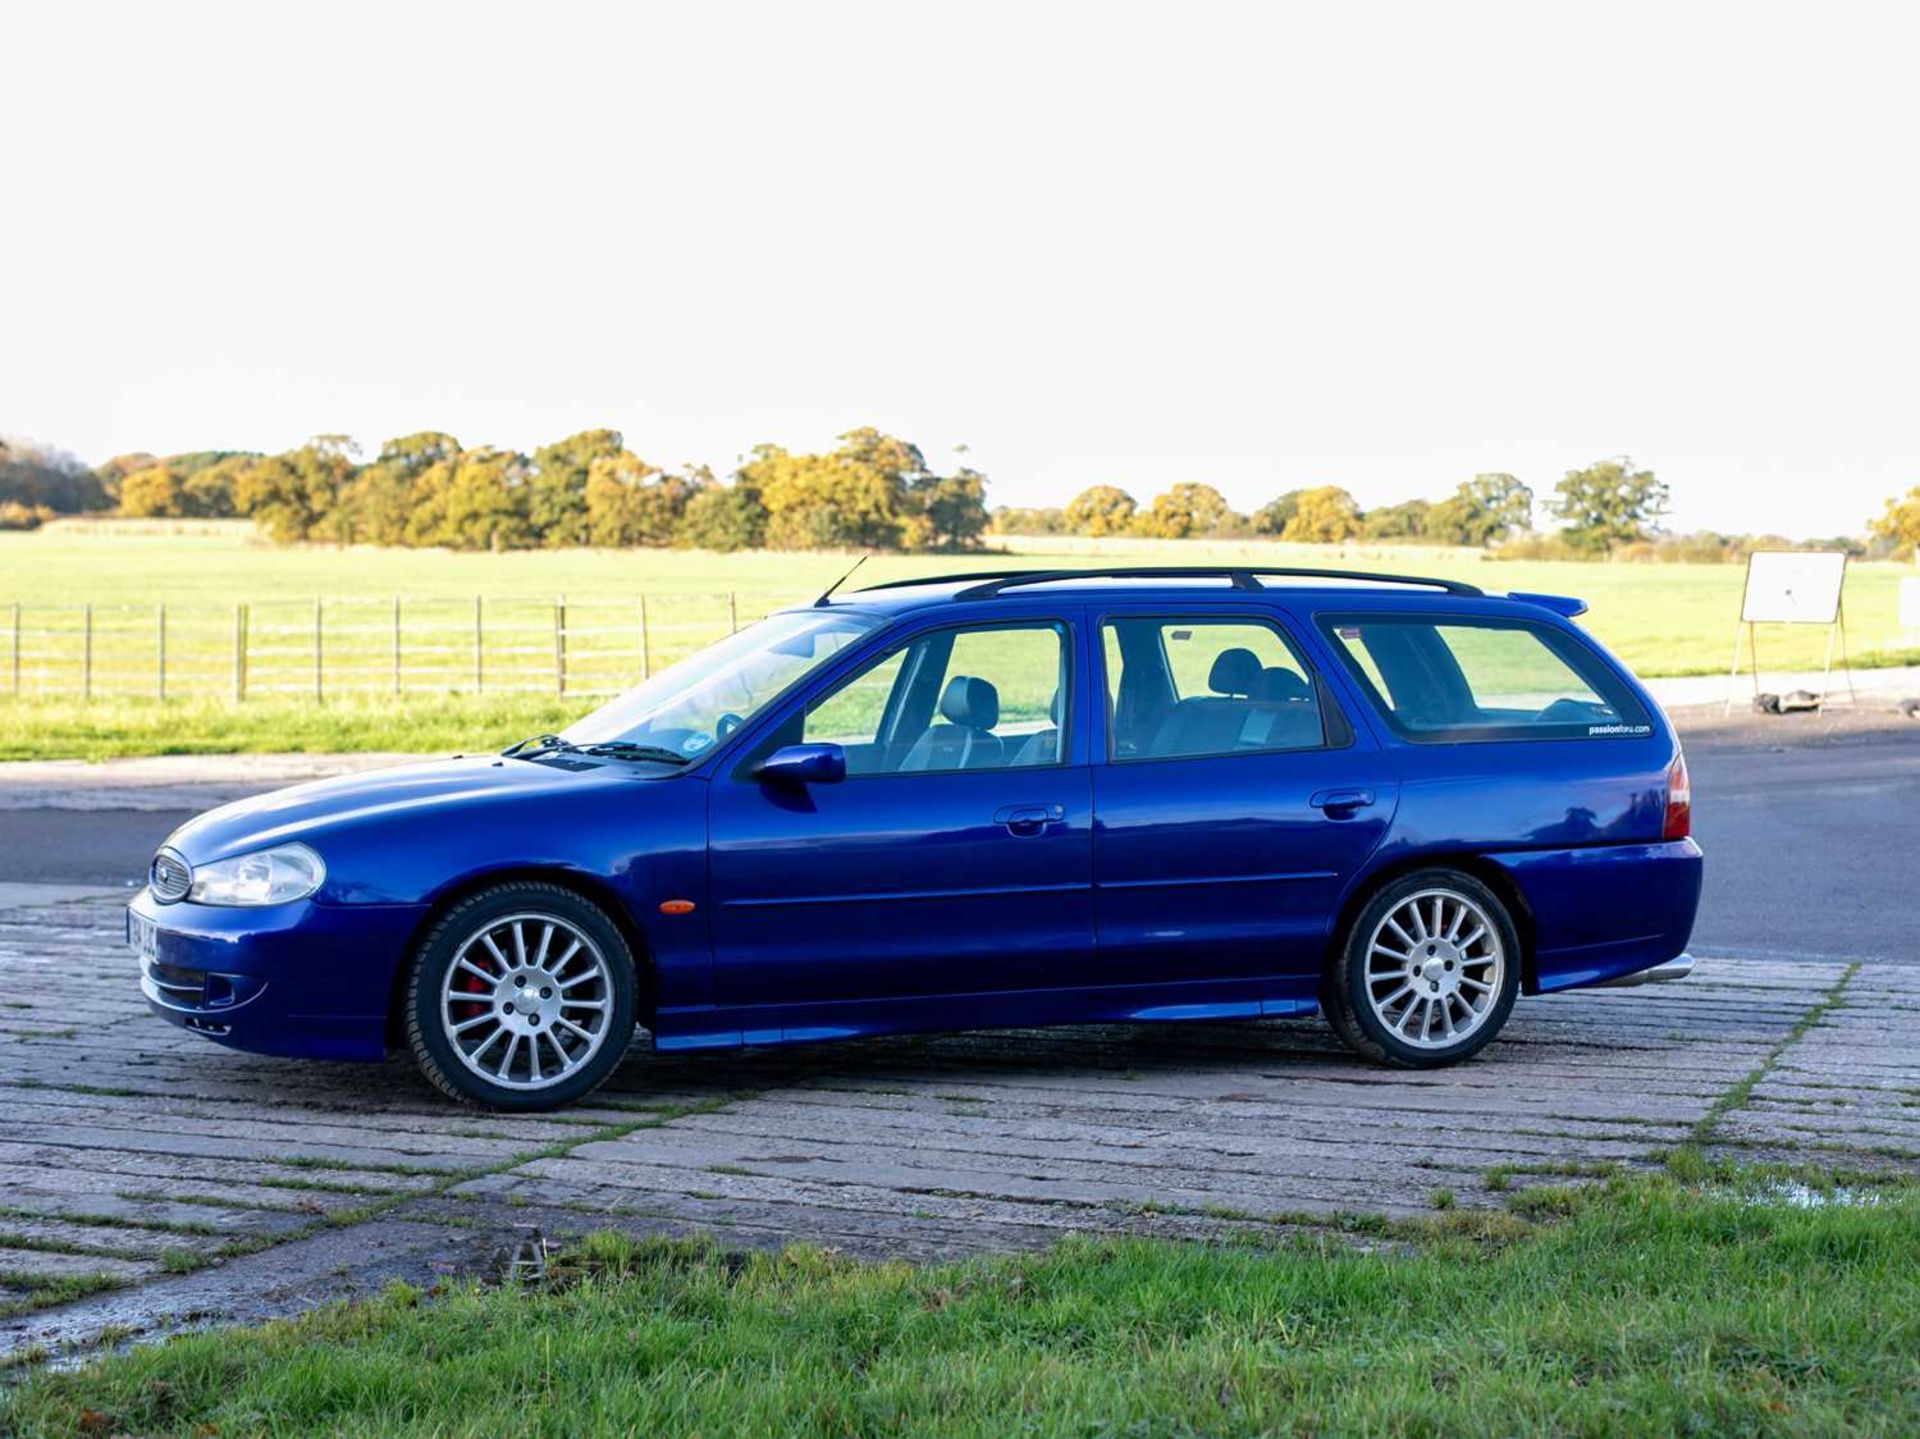 1999 Ford Mondeo ST200 Estate ***NO RESERVE*** Thought to be one of just 15 ST200 load-luggers, stil - Image 9 of 75